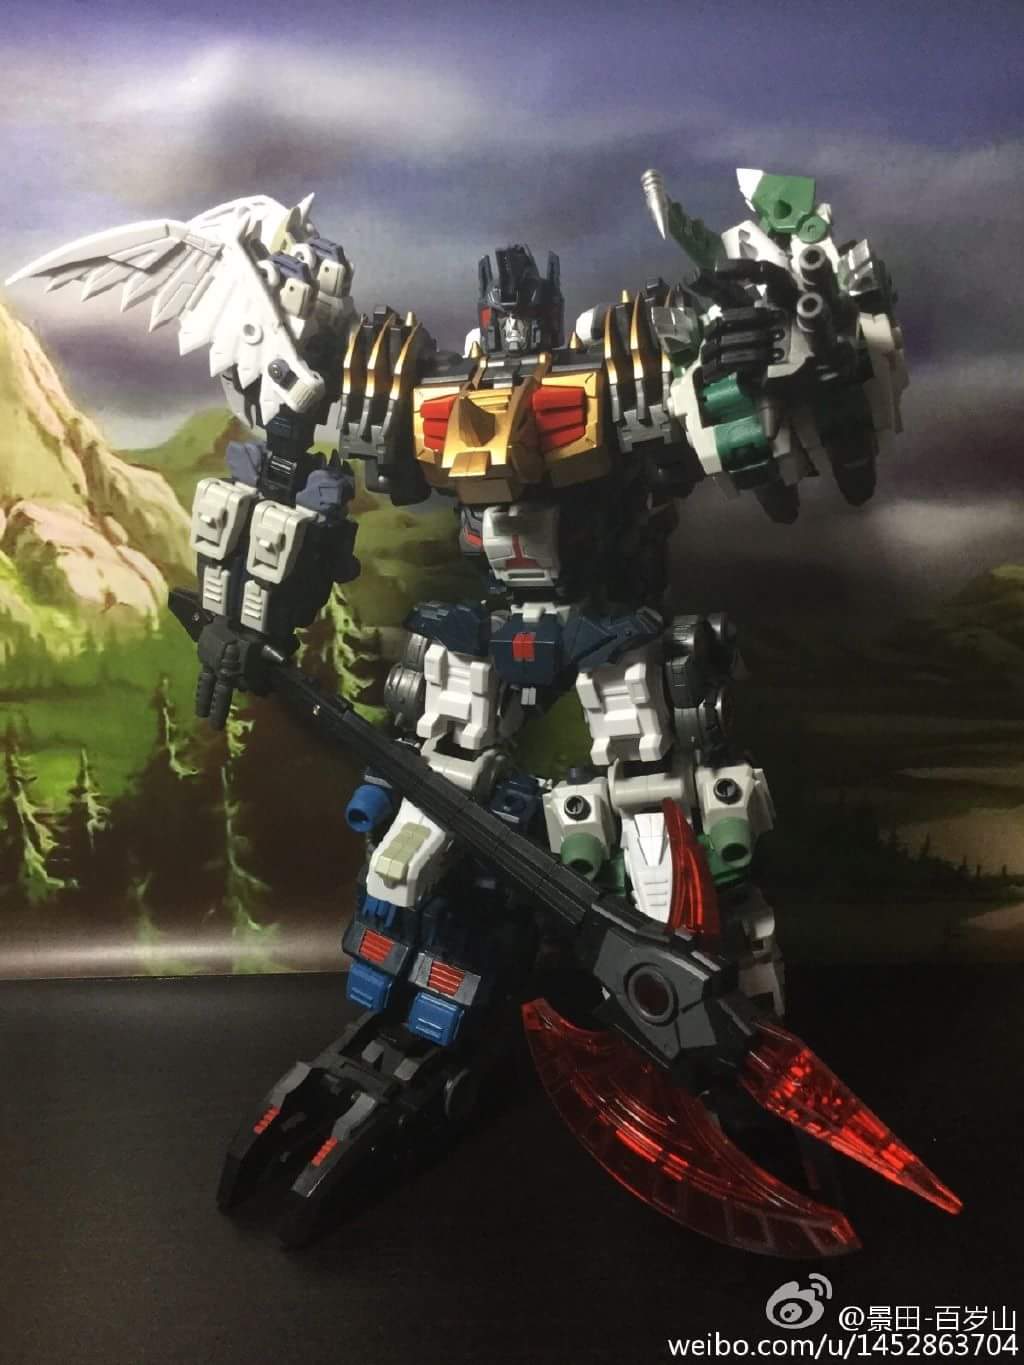 [FansProject] Produit Tiers - Ryu-Oh aka Dinoking (Victory) | Beastructor aka Monstructor (USA) - Page 2 6qefCfyr